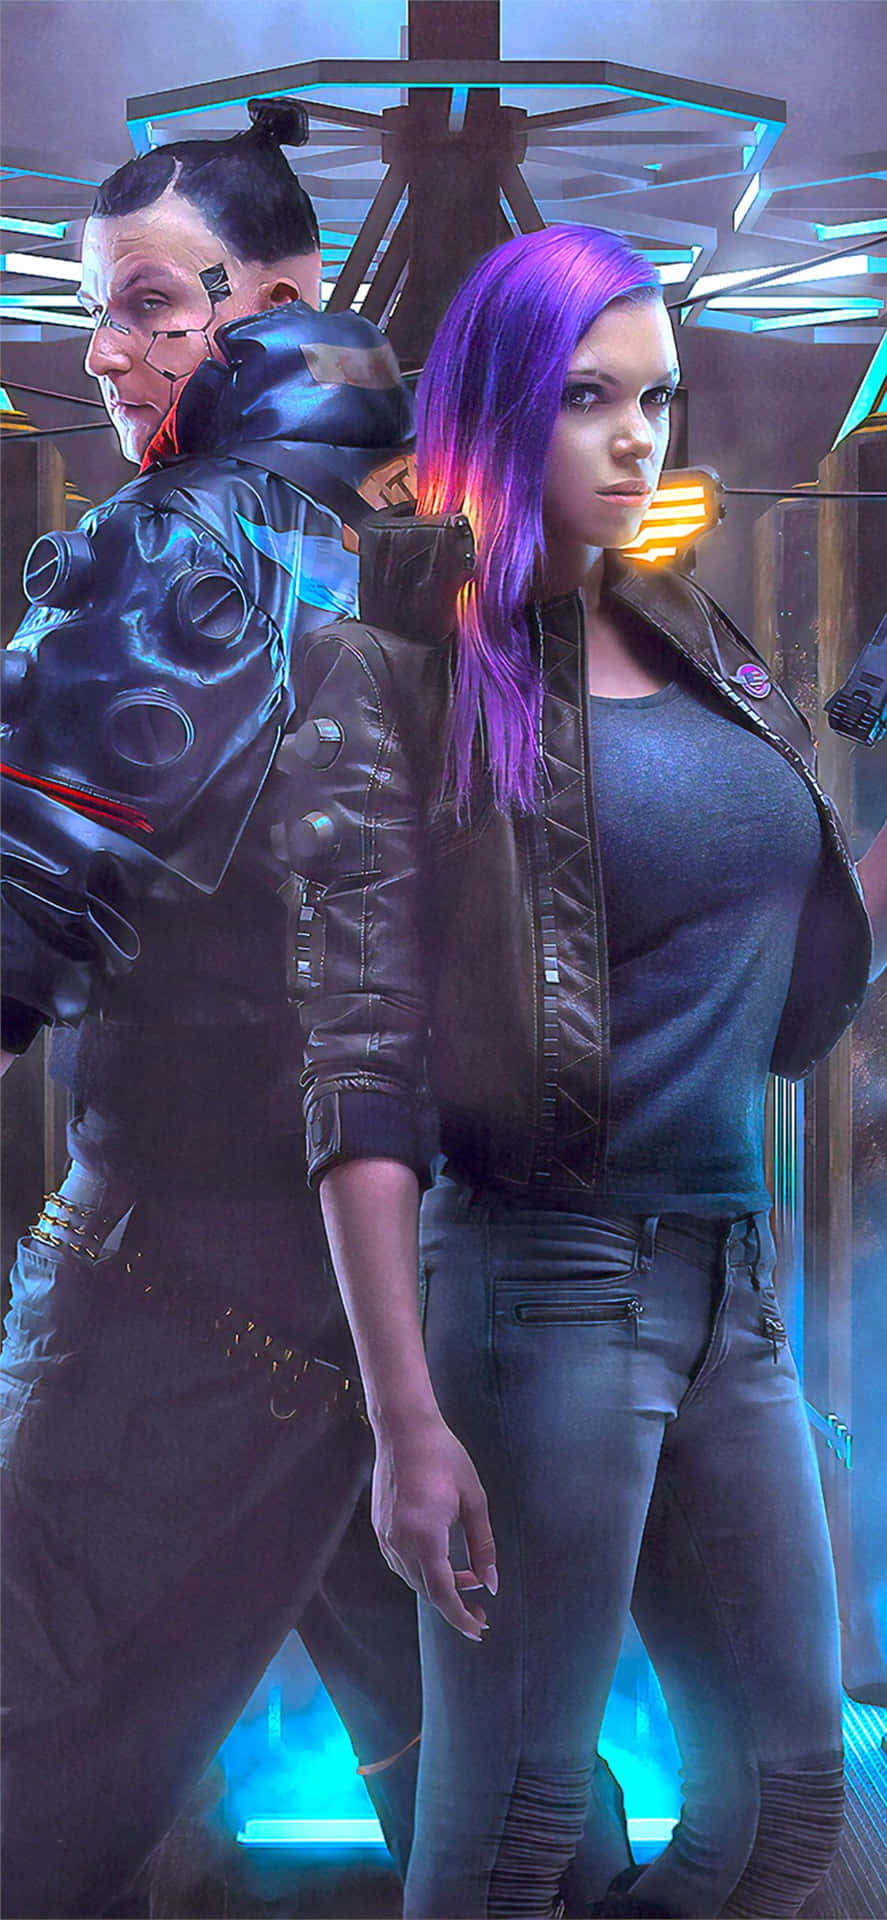 Iphone X Cyberpunk 2077 Background Man And Woman Character